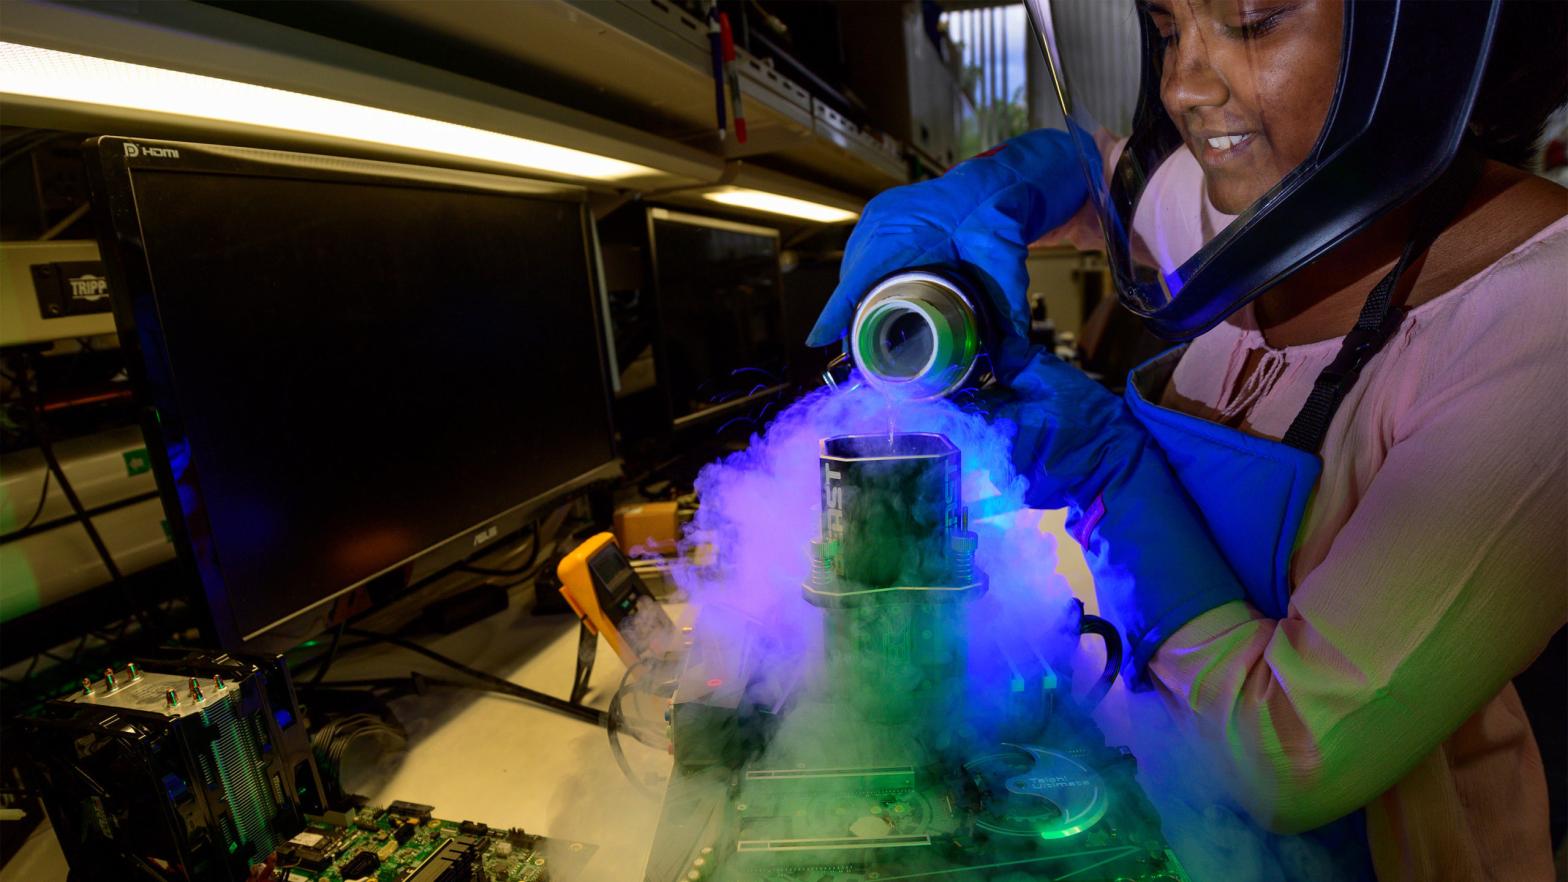 Navya Pramod, a systems engineer in Intel's overclocking lab in Hillsboro, Oregon, pours liquid nitrogen to cool down a 9th Gen Intel Core i9-9900K processor during an overclocking demonstration in September 2019. (Photo: Walden Kirsch/Intel Corporation)